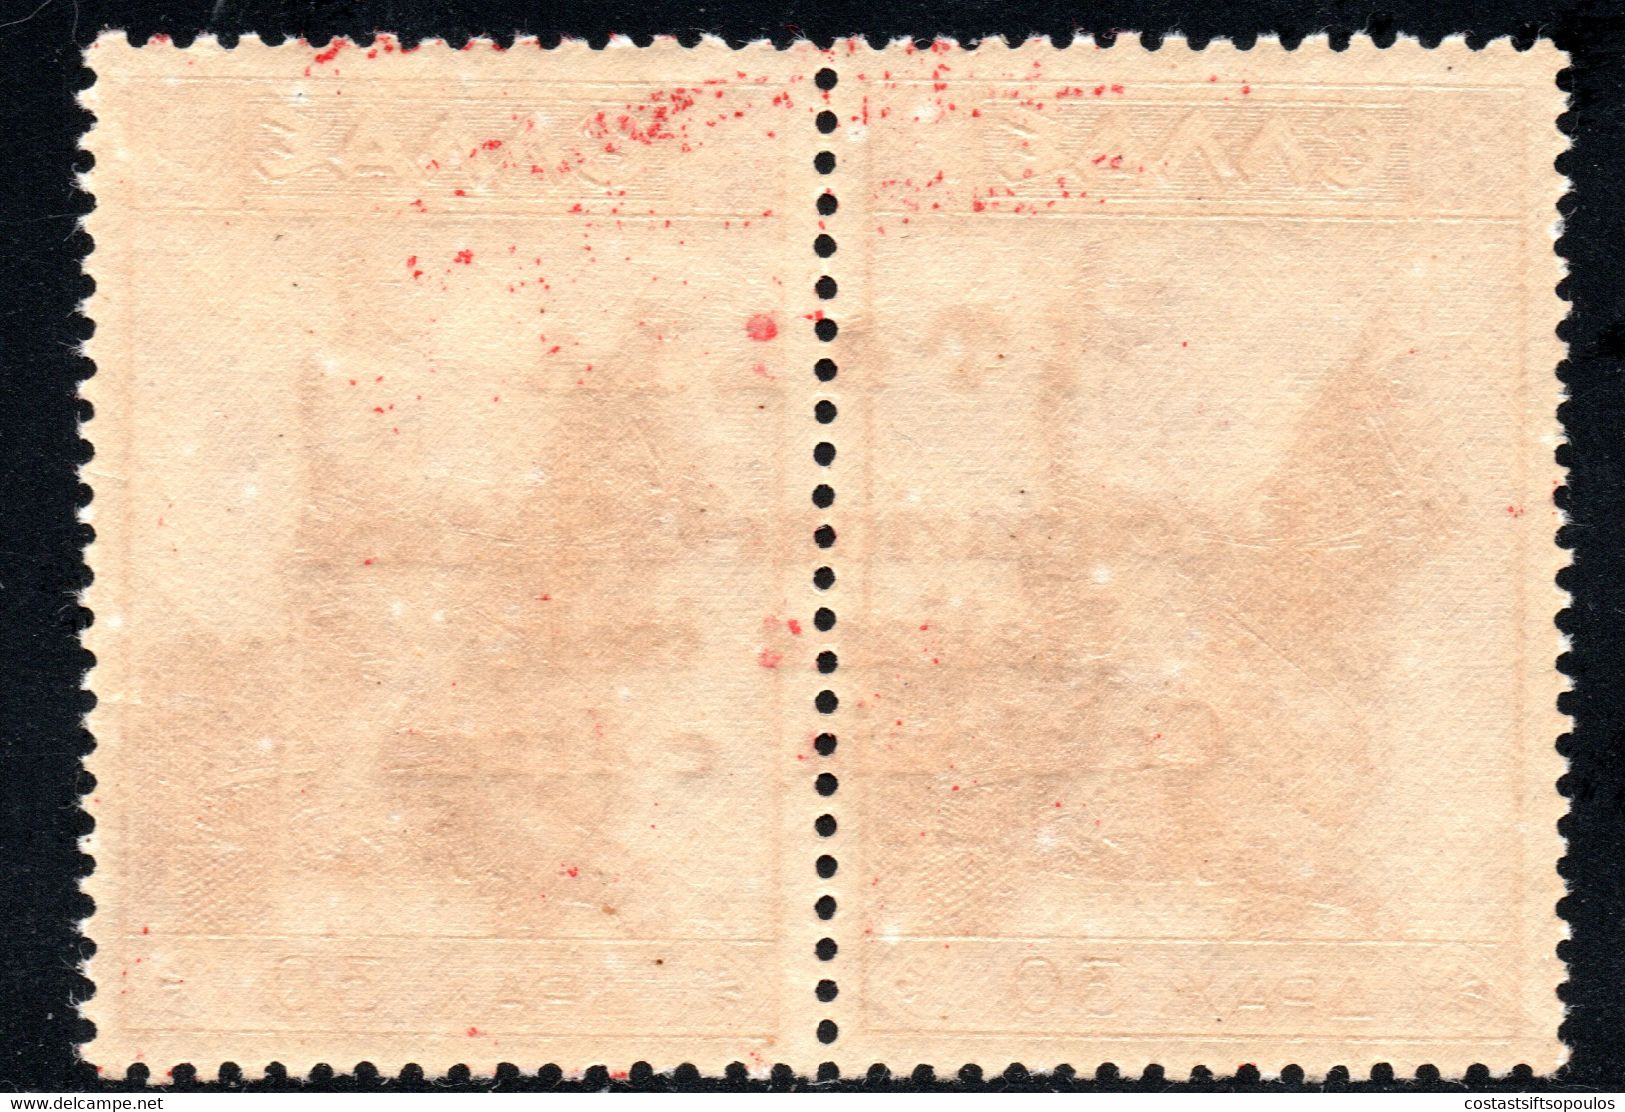 165.GREECE,ITALY,IONIAN,CEFALONIA,1941 30DR.RIDER,RED OVERPRINT???,MNH,POSSIBLY PRIVATE - Ionische Eilanden